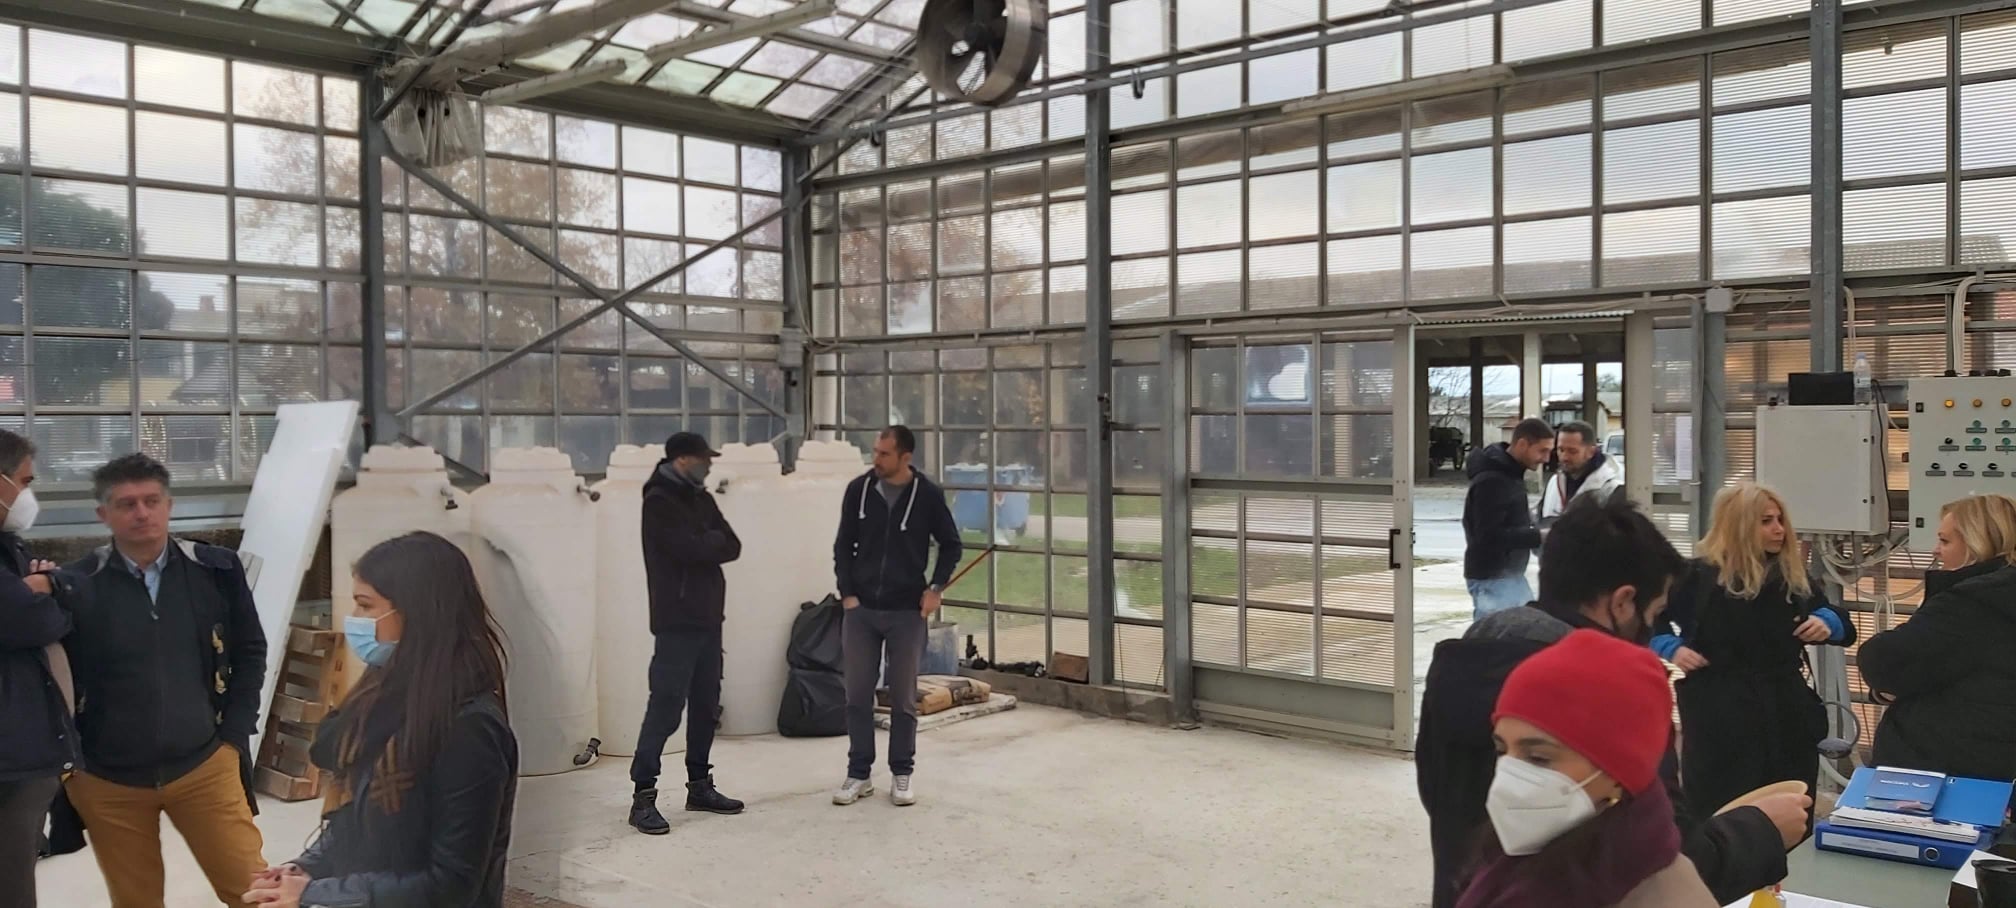 Visit to the project facilities. The indoor area (greenhouse) with the visitors is depicted